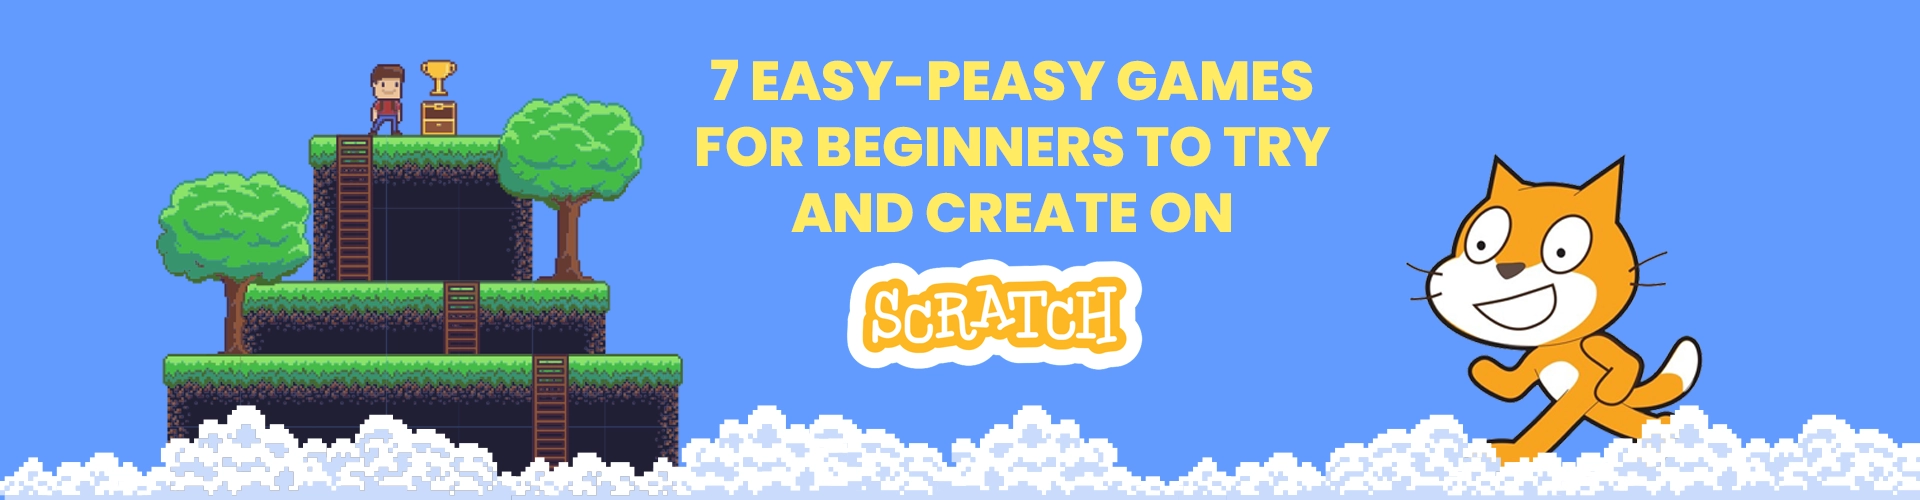 7 Easy-Peasy Games for Beginners to Try and Create On Scratch